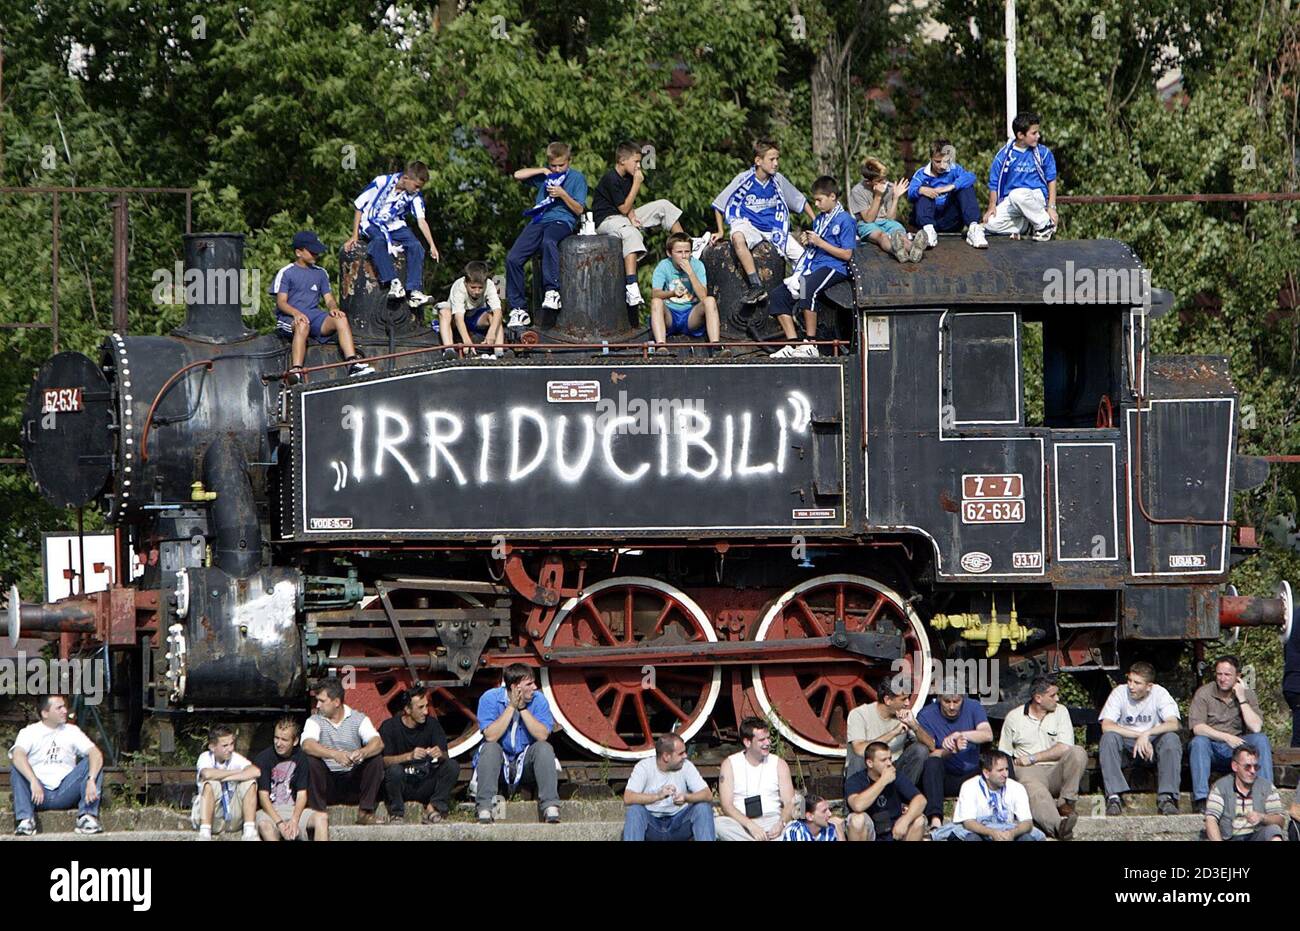 Supporters of the Bosnian champion FK Zeljeznicar (railwayman) sit atop of  an old locomotive as they watch a national league match at the Grbavica  Stadium in Sarajevo August 10, 2002, [the last